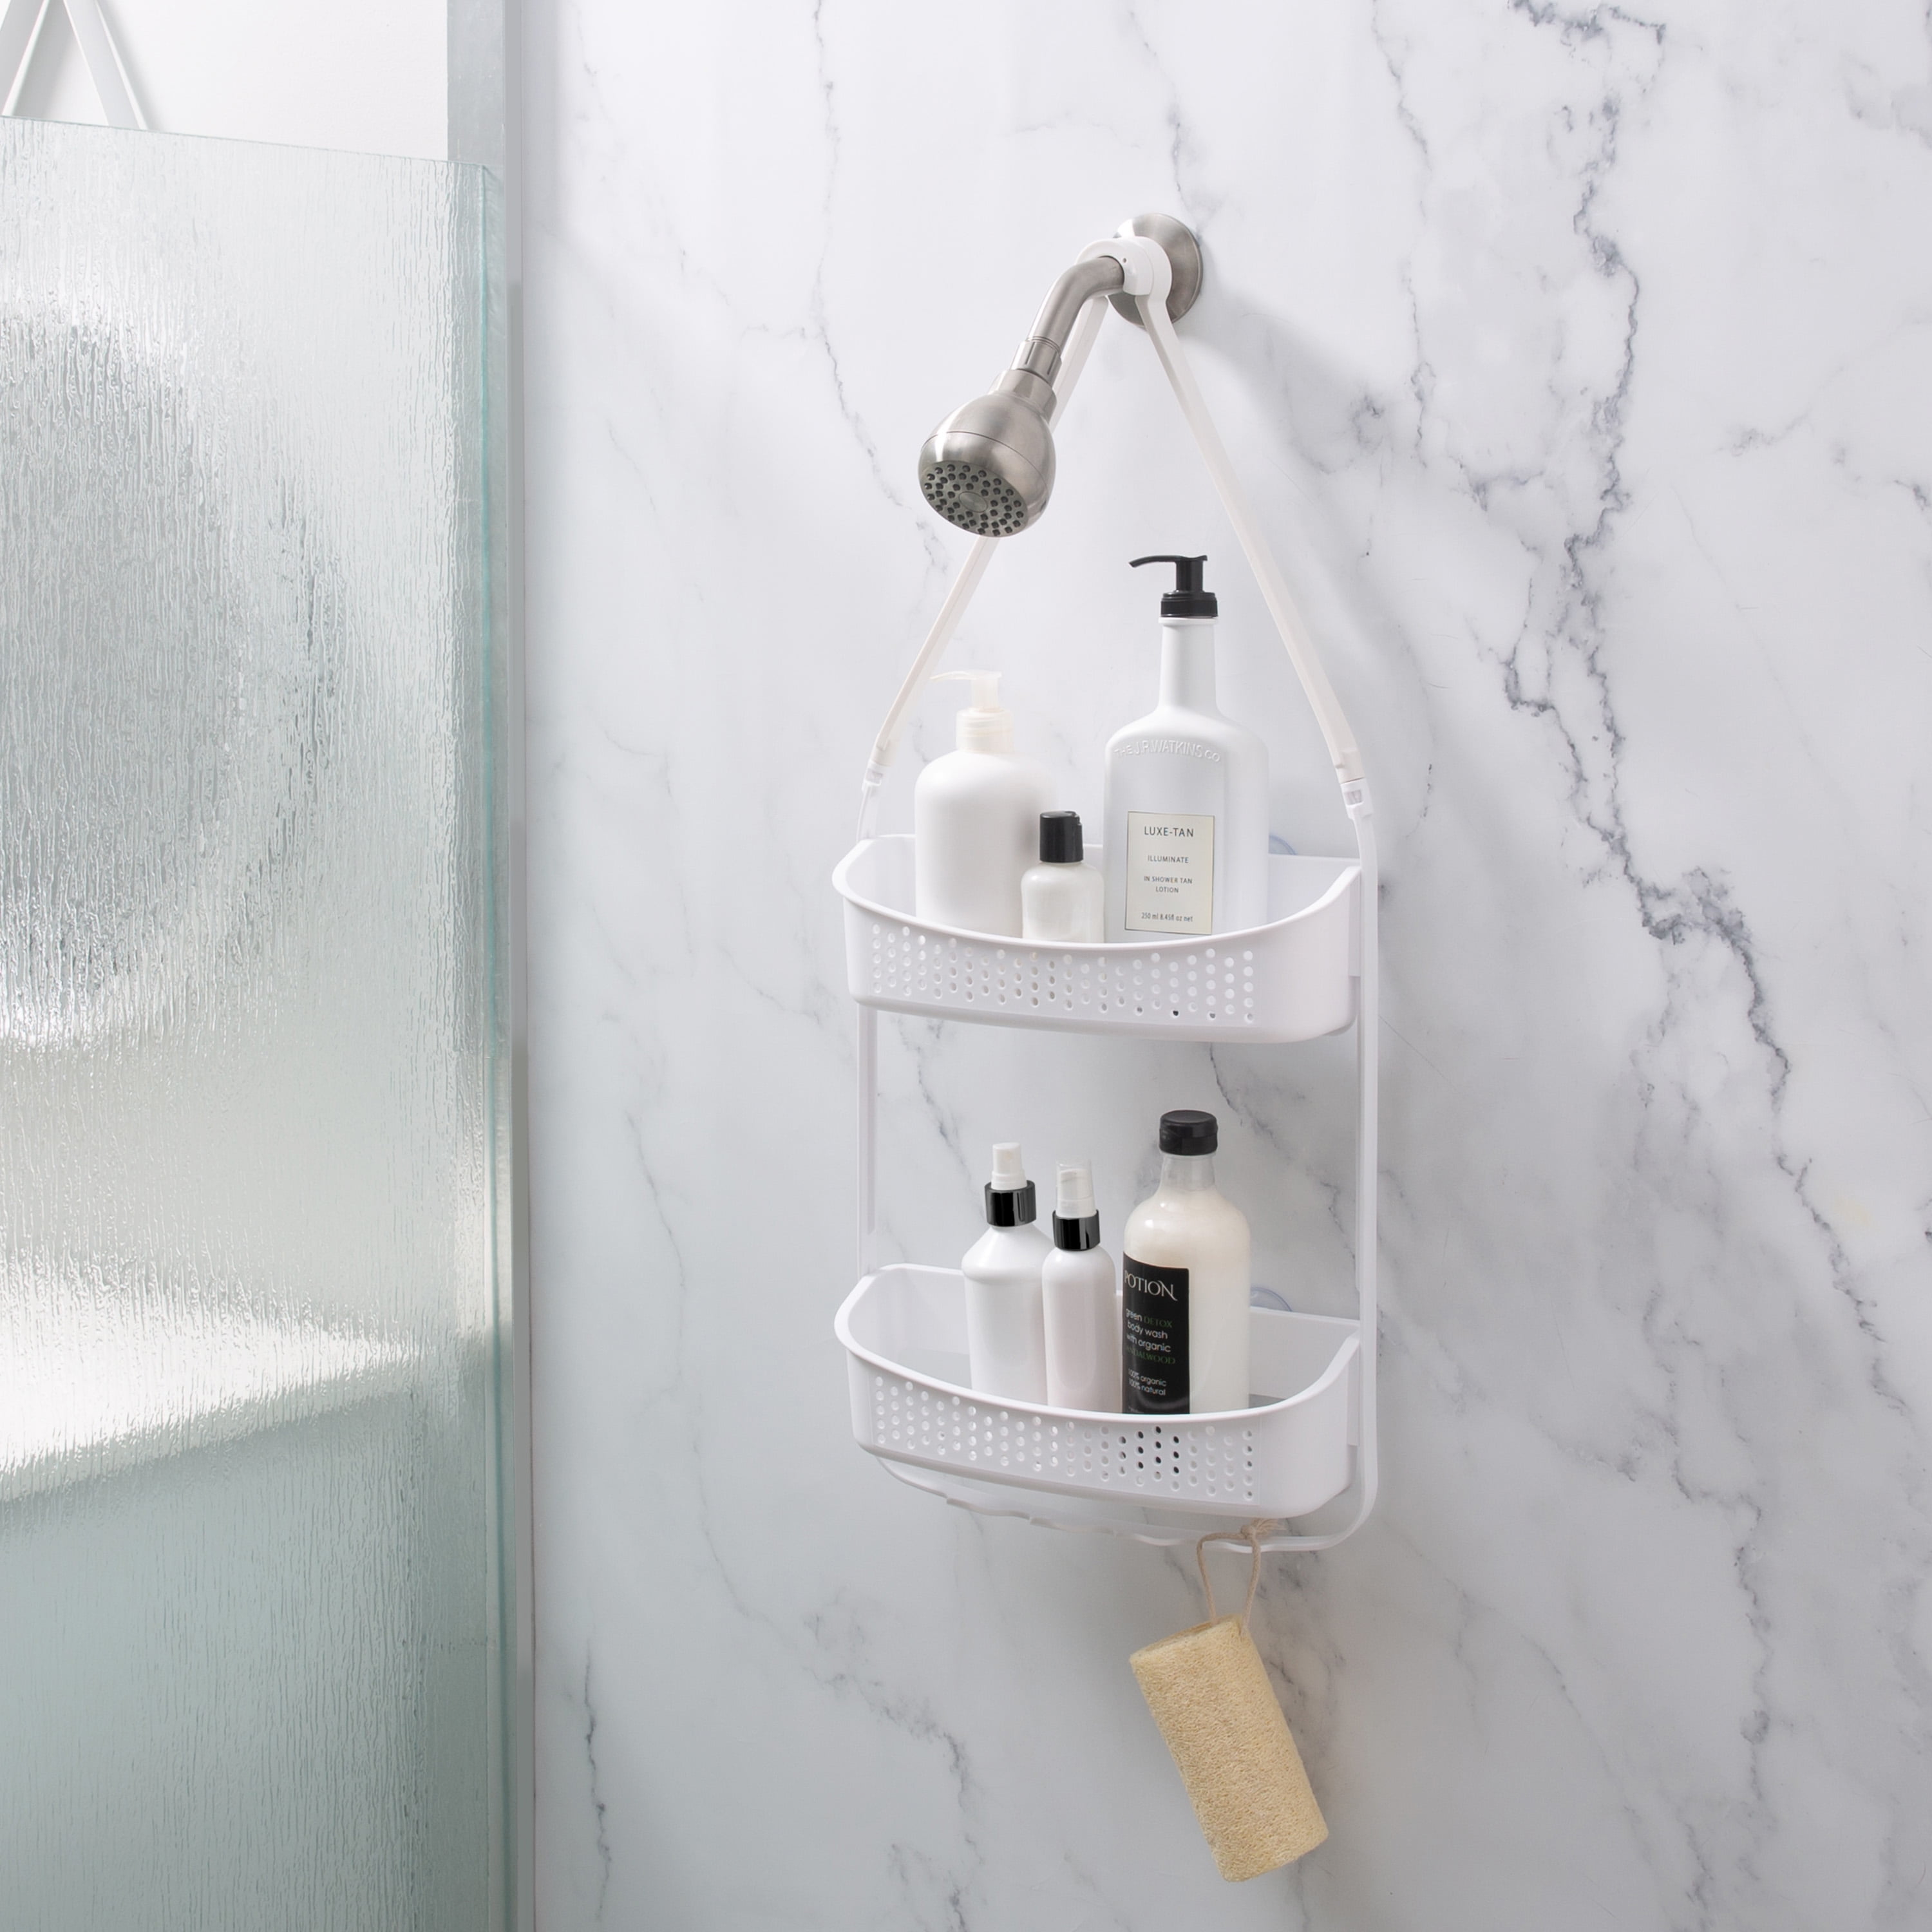 Bath Bliss 2-Way Convertible Shower Caddy in Sea Glass